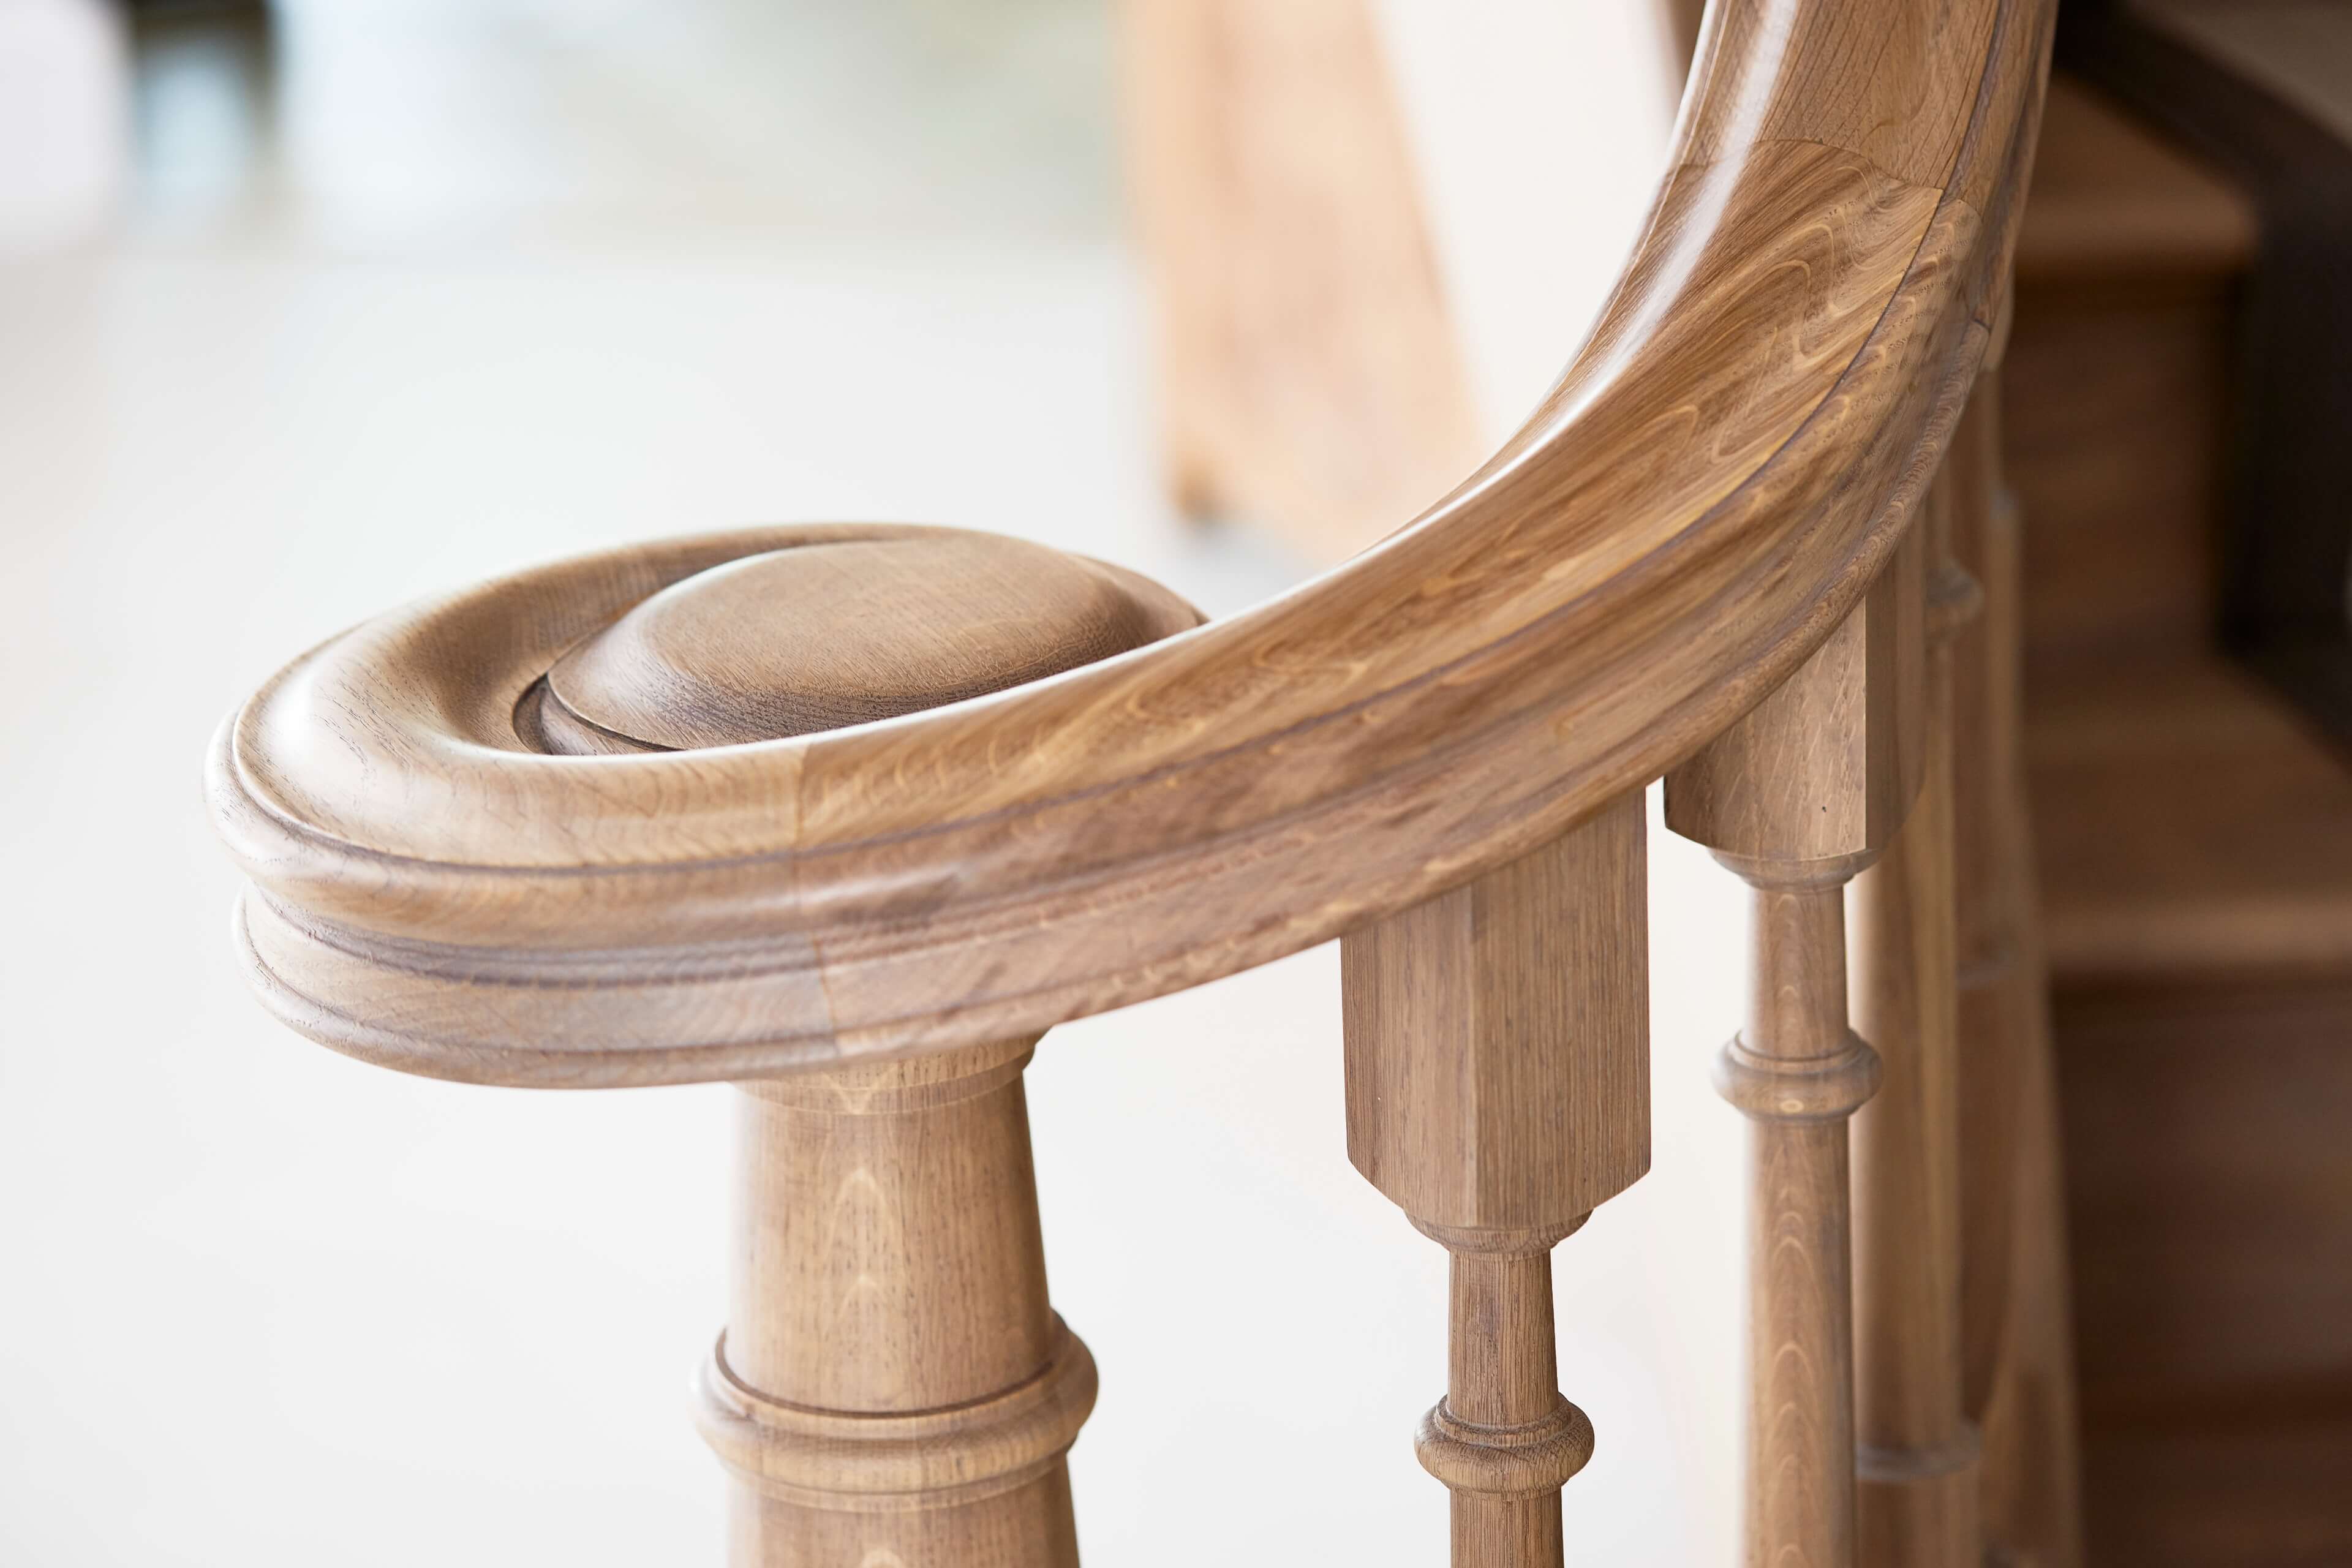 The scroll at the end of the solid oak handrail